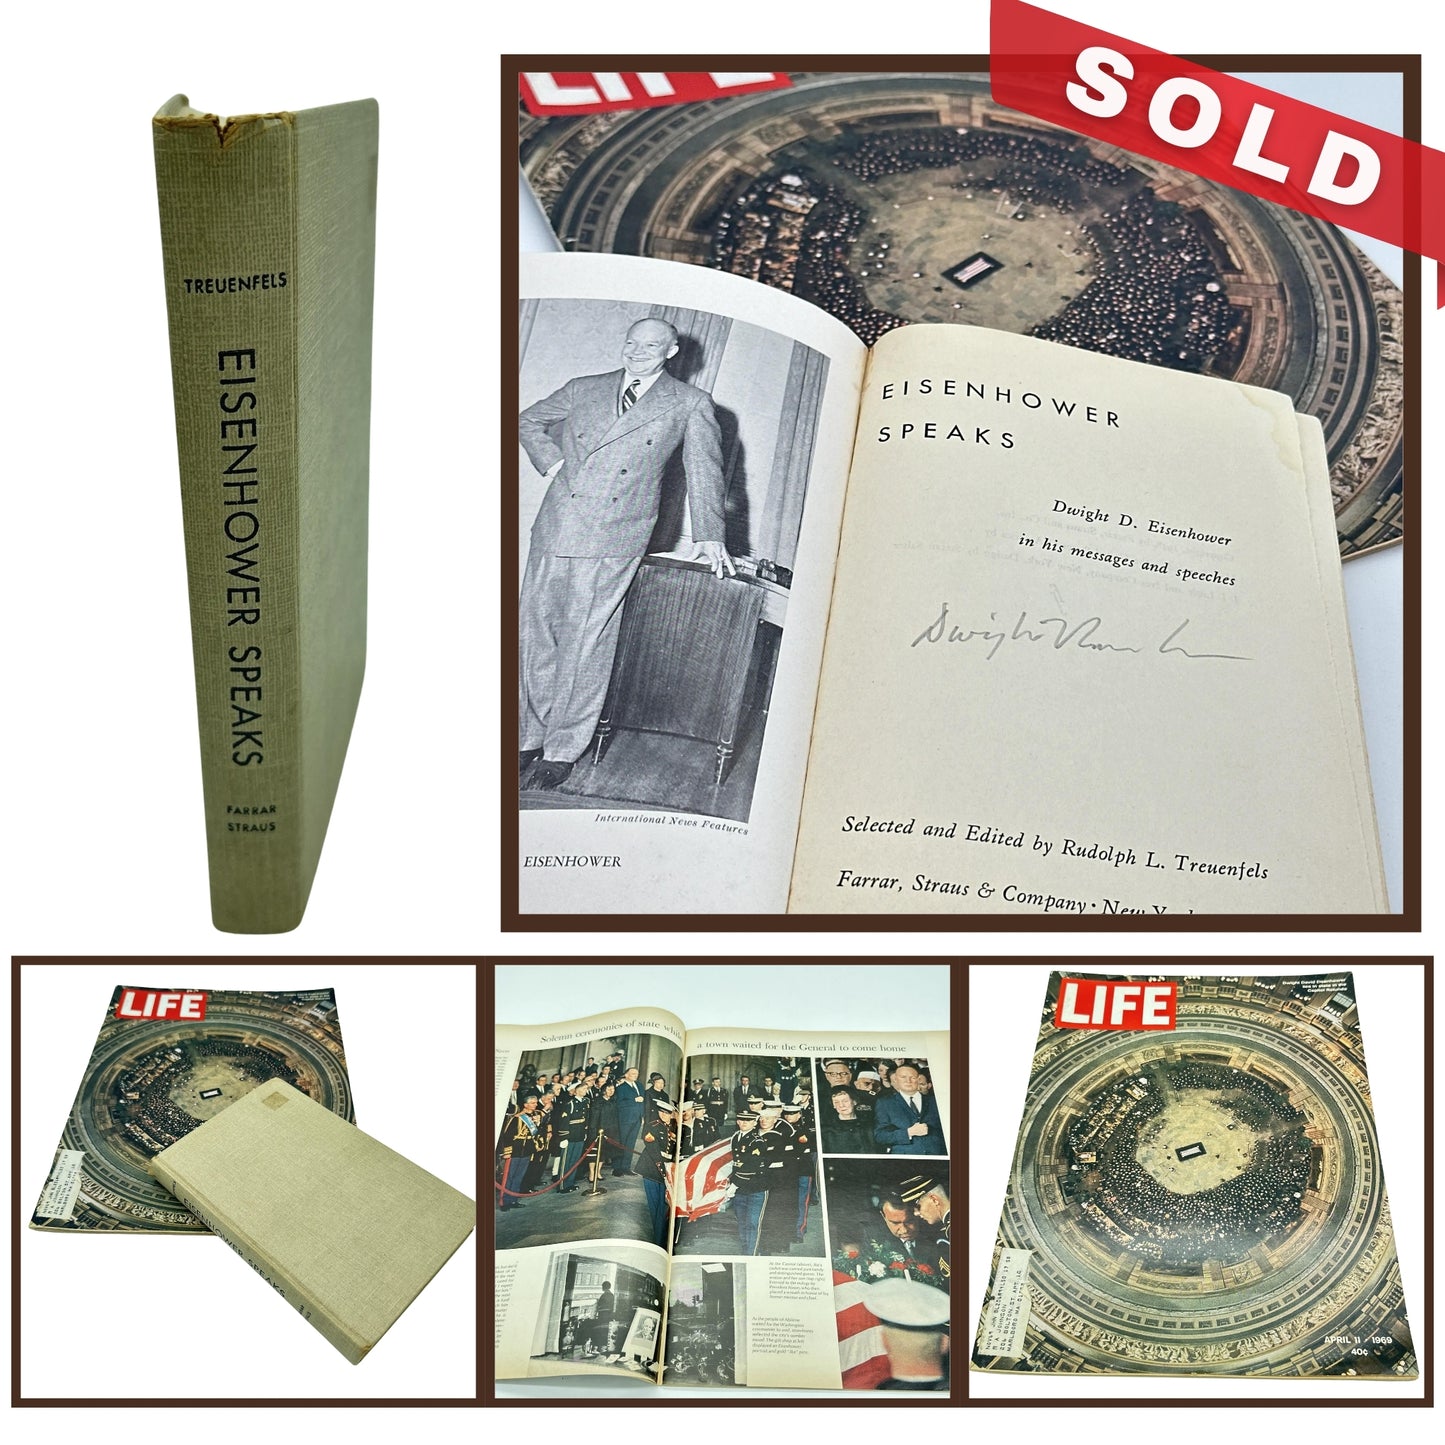 "Eisenhower Speaks” signed book + LIFE Magazine covering his death